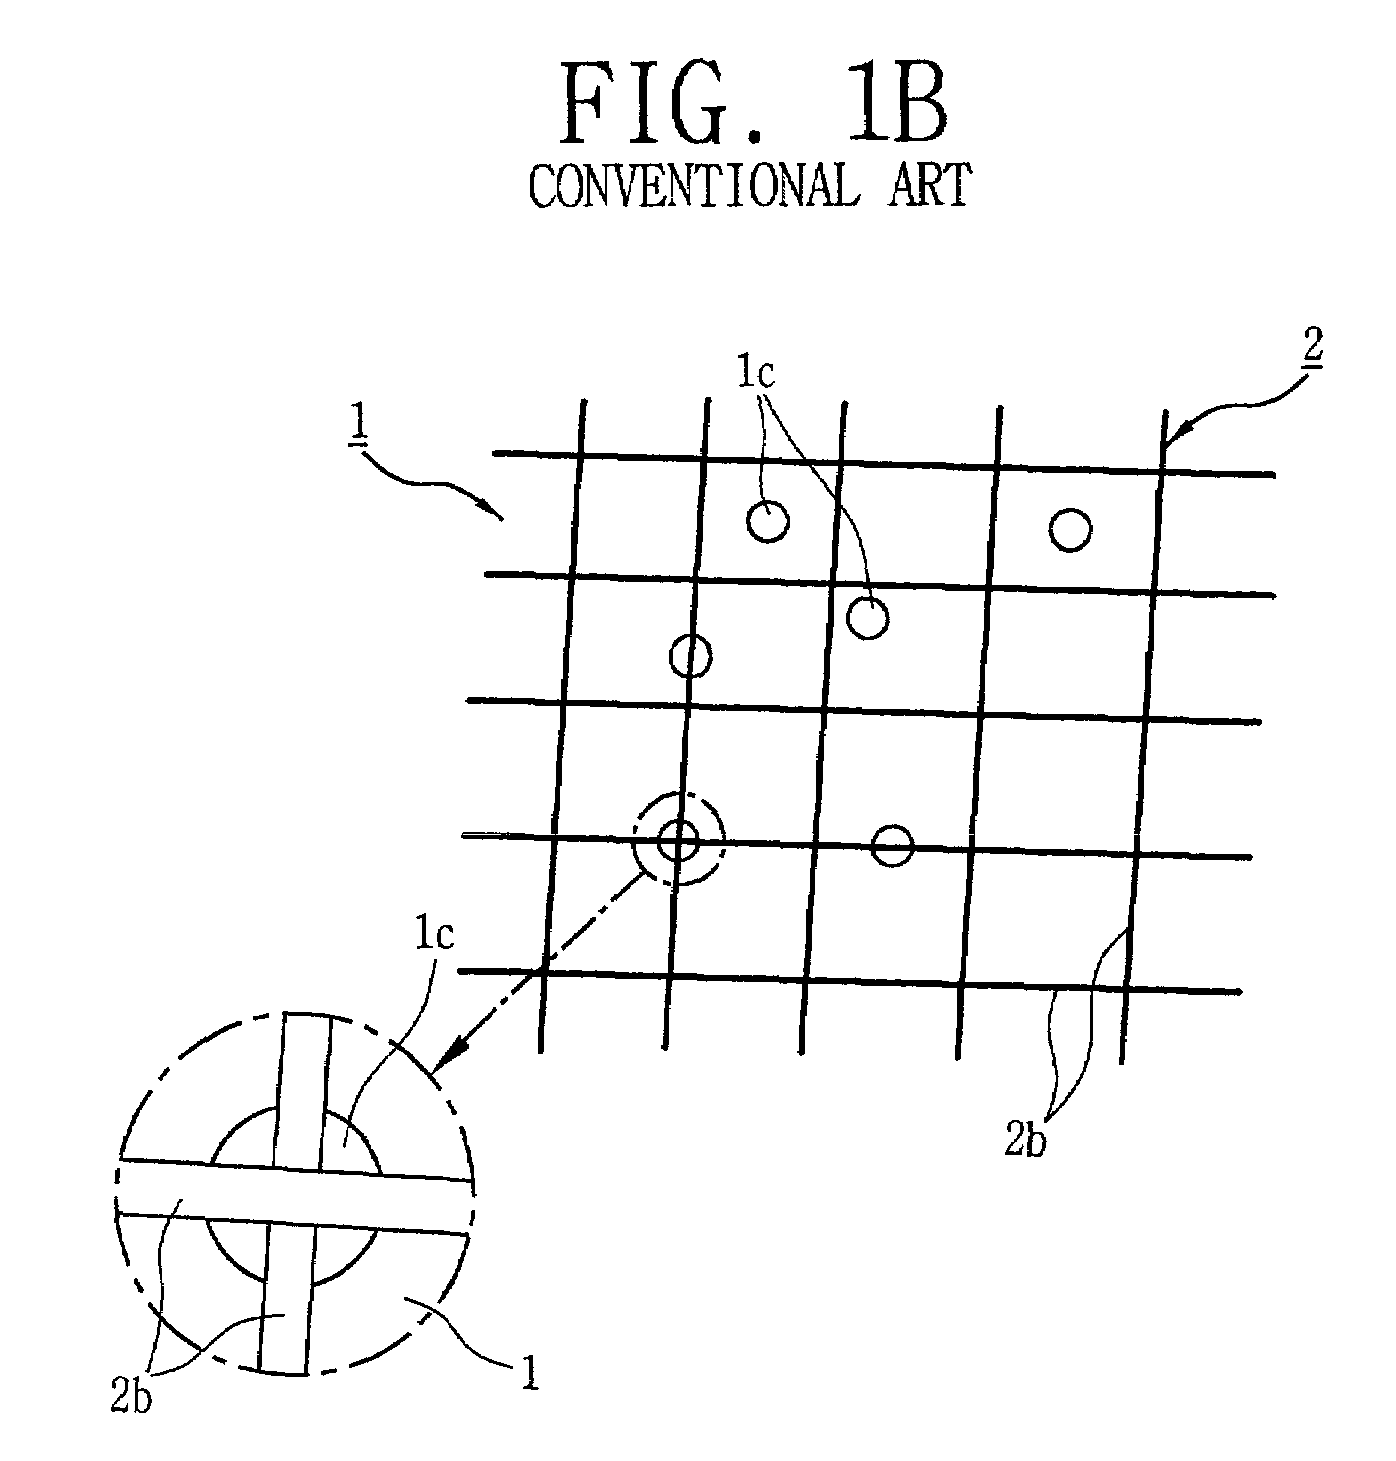 Method for plugging holes in a printed circuit board